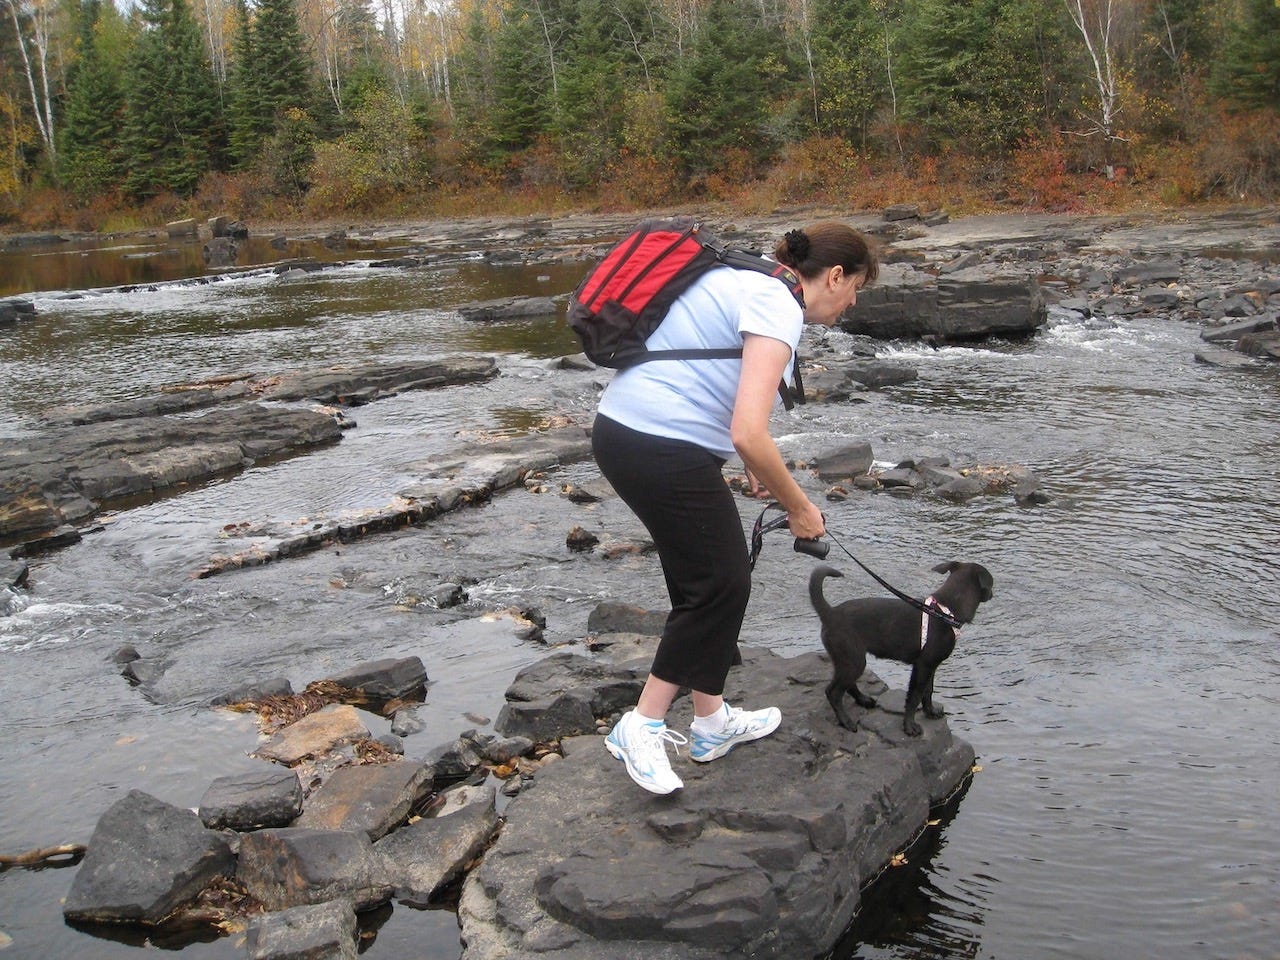 A woman and a leashed puppy standing on a rock in the middle of a river.